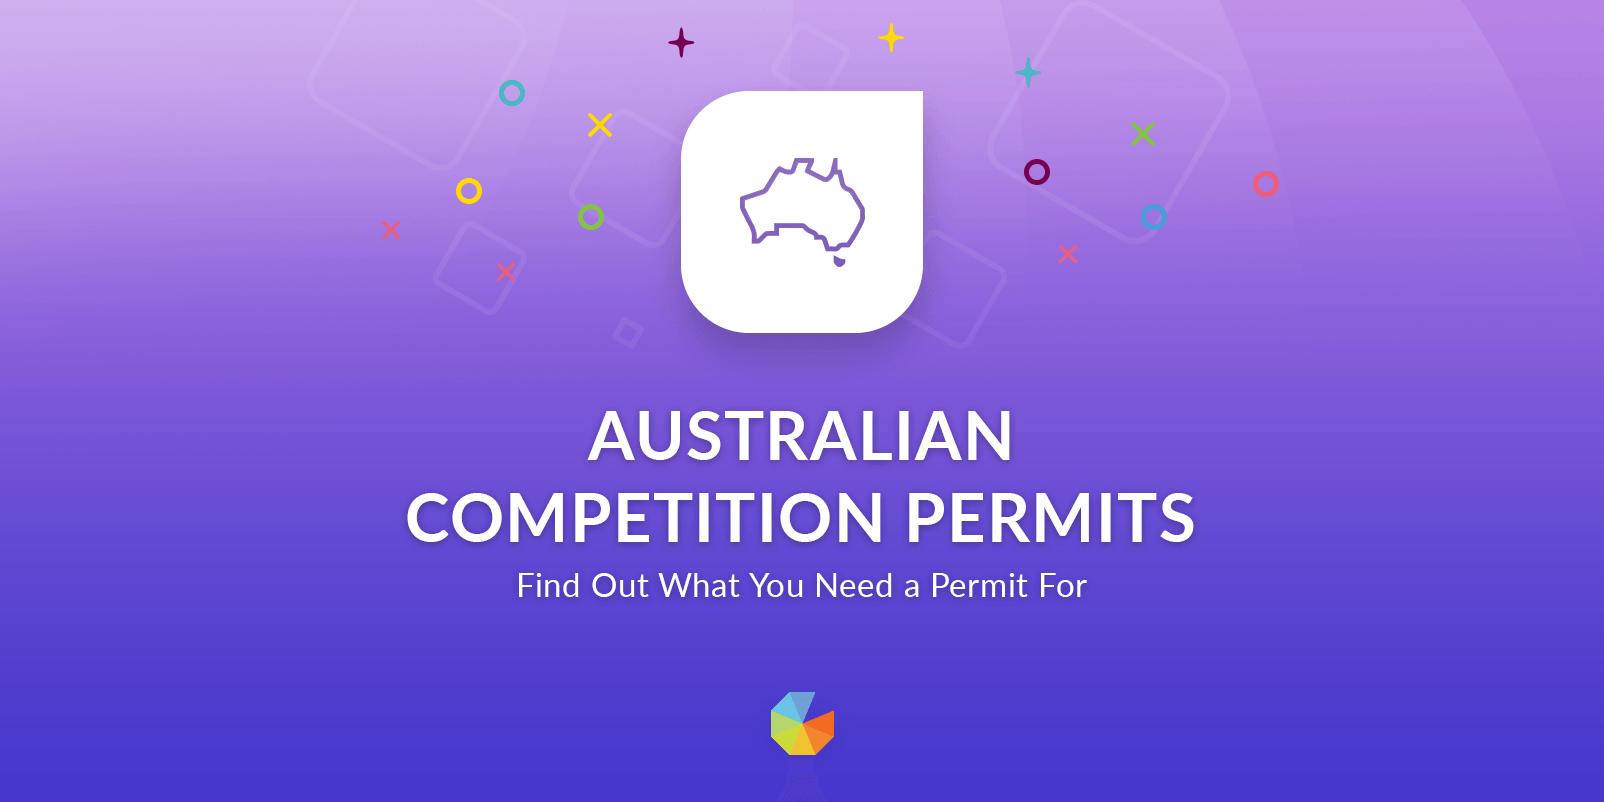 Australian Competition Permits: Find Out What You Need a Permit For